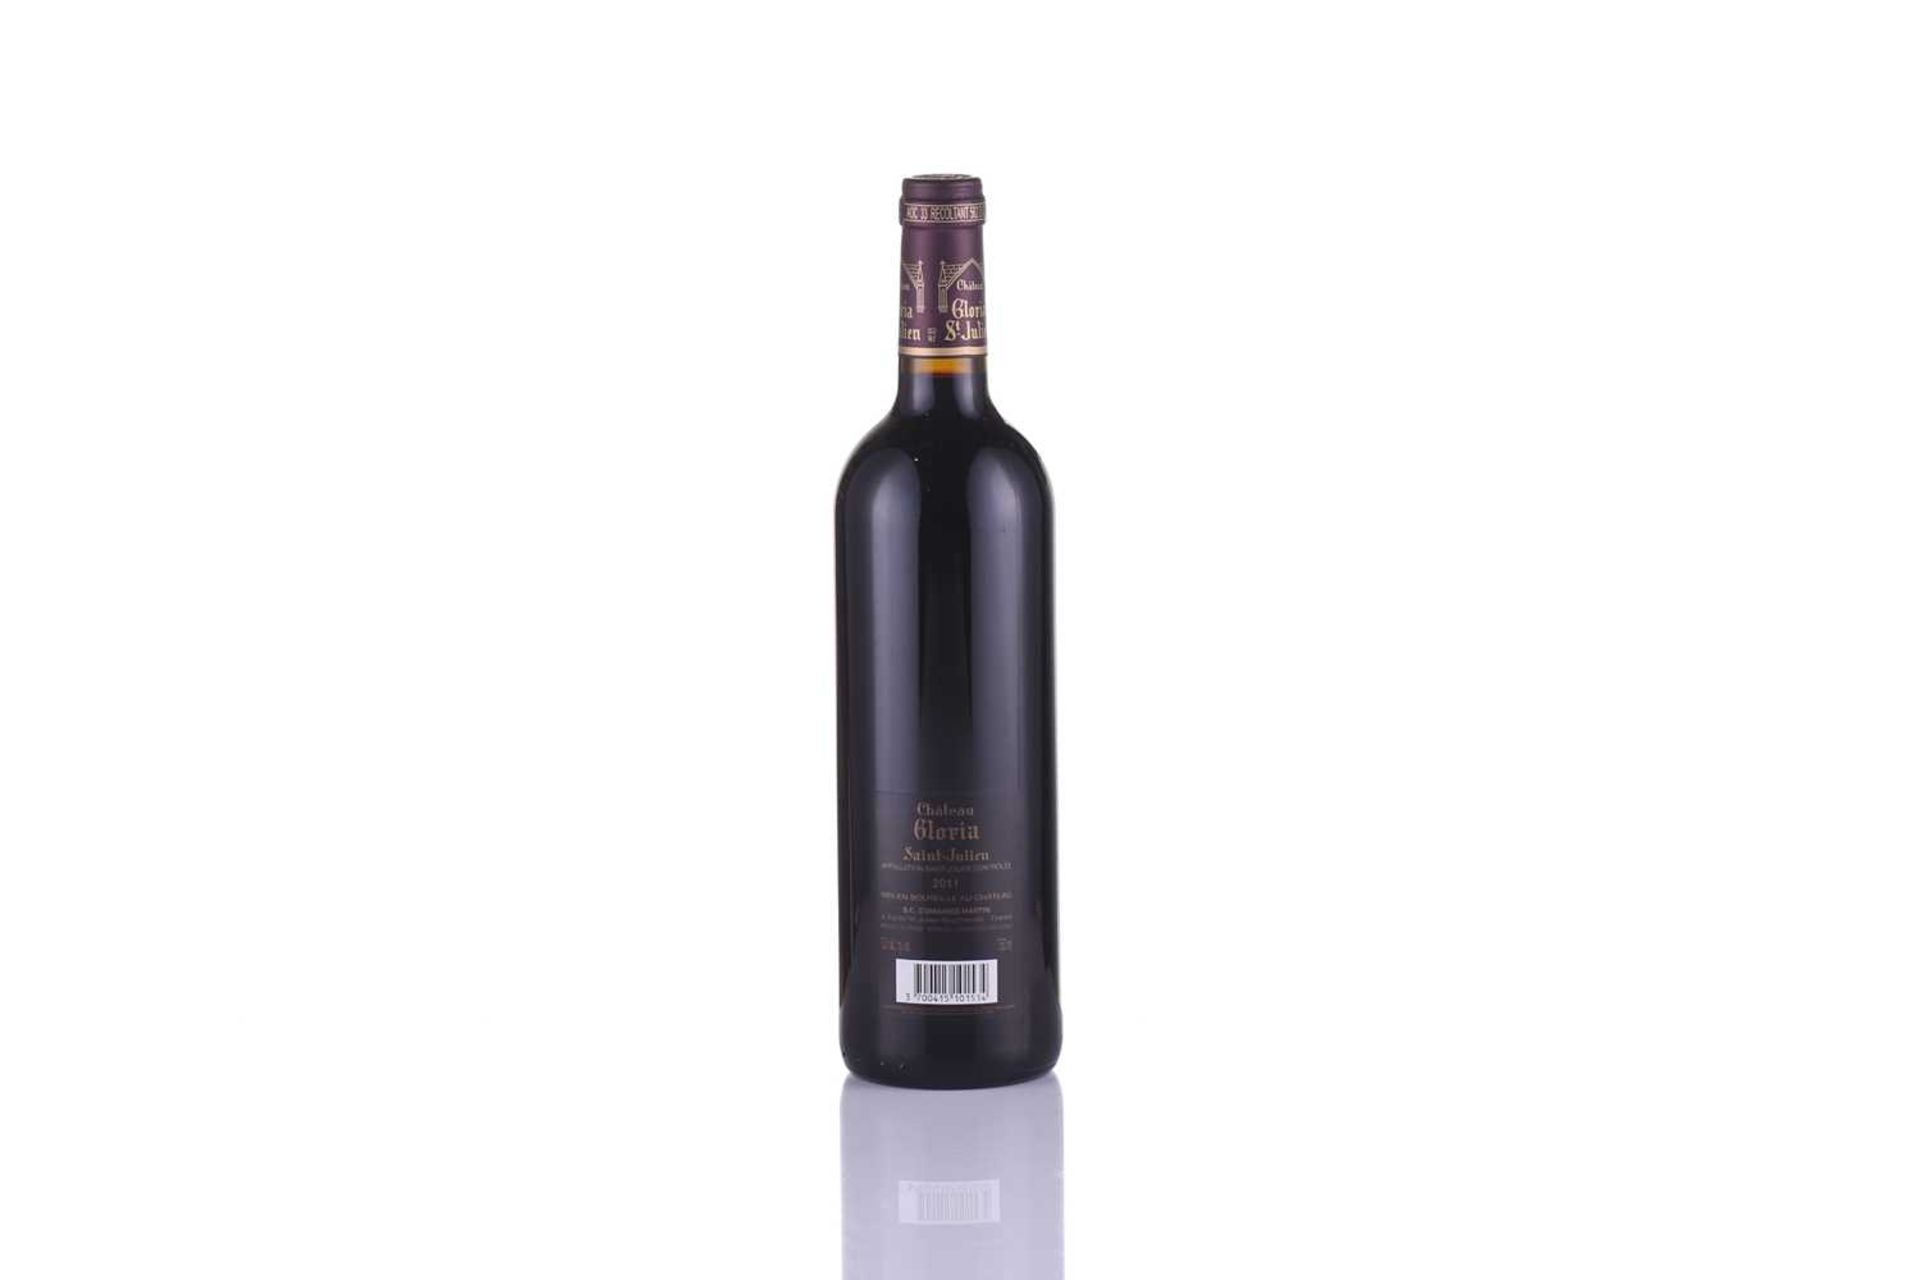 Six bottles of Chateau Gloria St Julien Bordeaux, 2011, OWCPrivate collector in London Unopened - Image 5 of 21